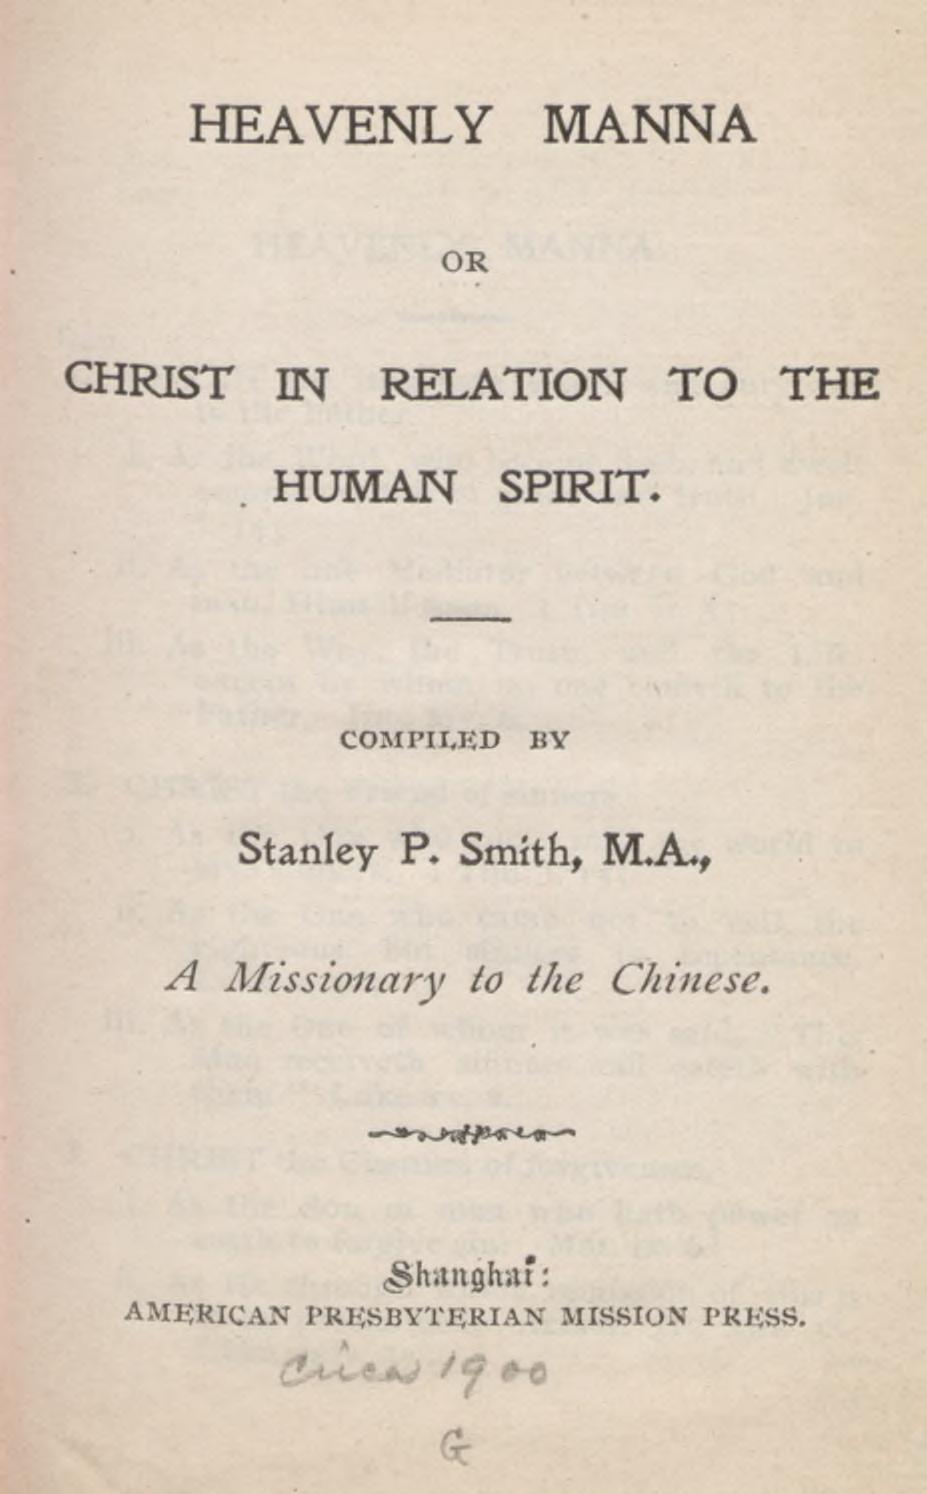 HEAVENLY MANNA OR CHRIST IN RELATION TO THE HUMAN SPIRIT. c o m p i l e d b y Stanley P.